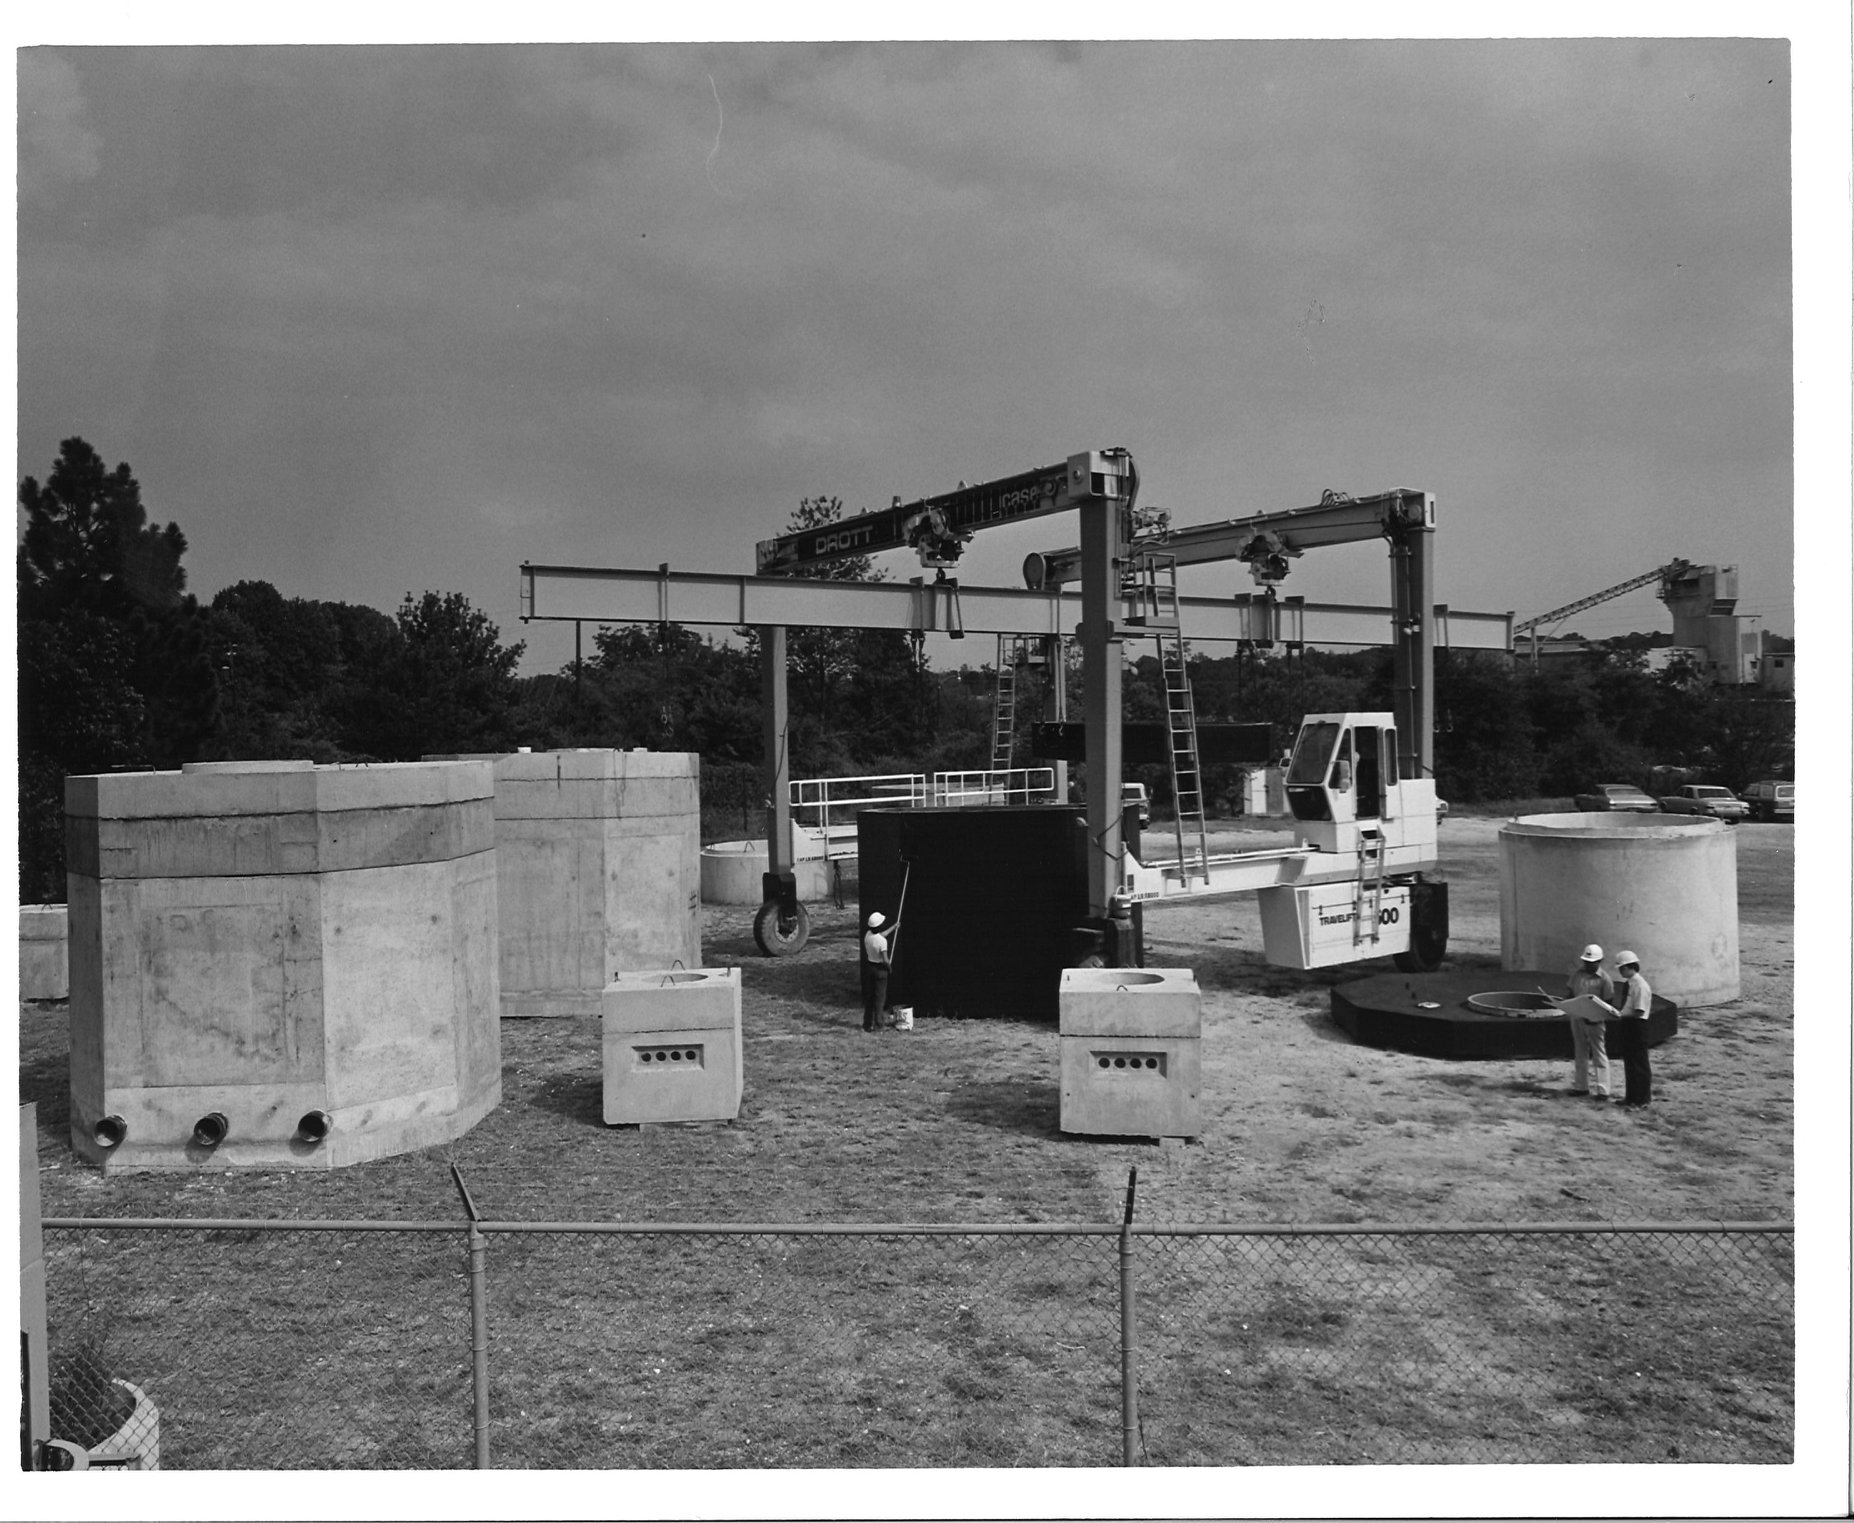 Construction site with precast concrete elements in progress. A few workers can be seen working on the foundation of a building with heavy machinery in the background.